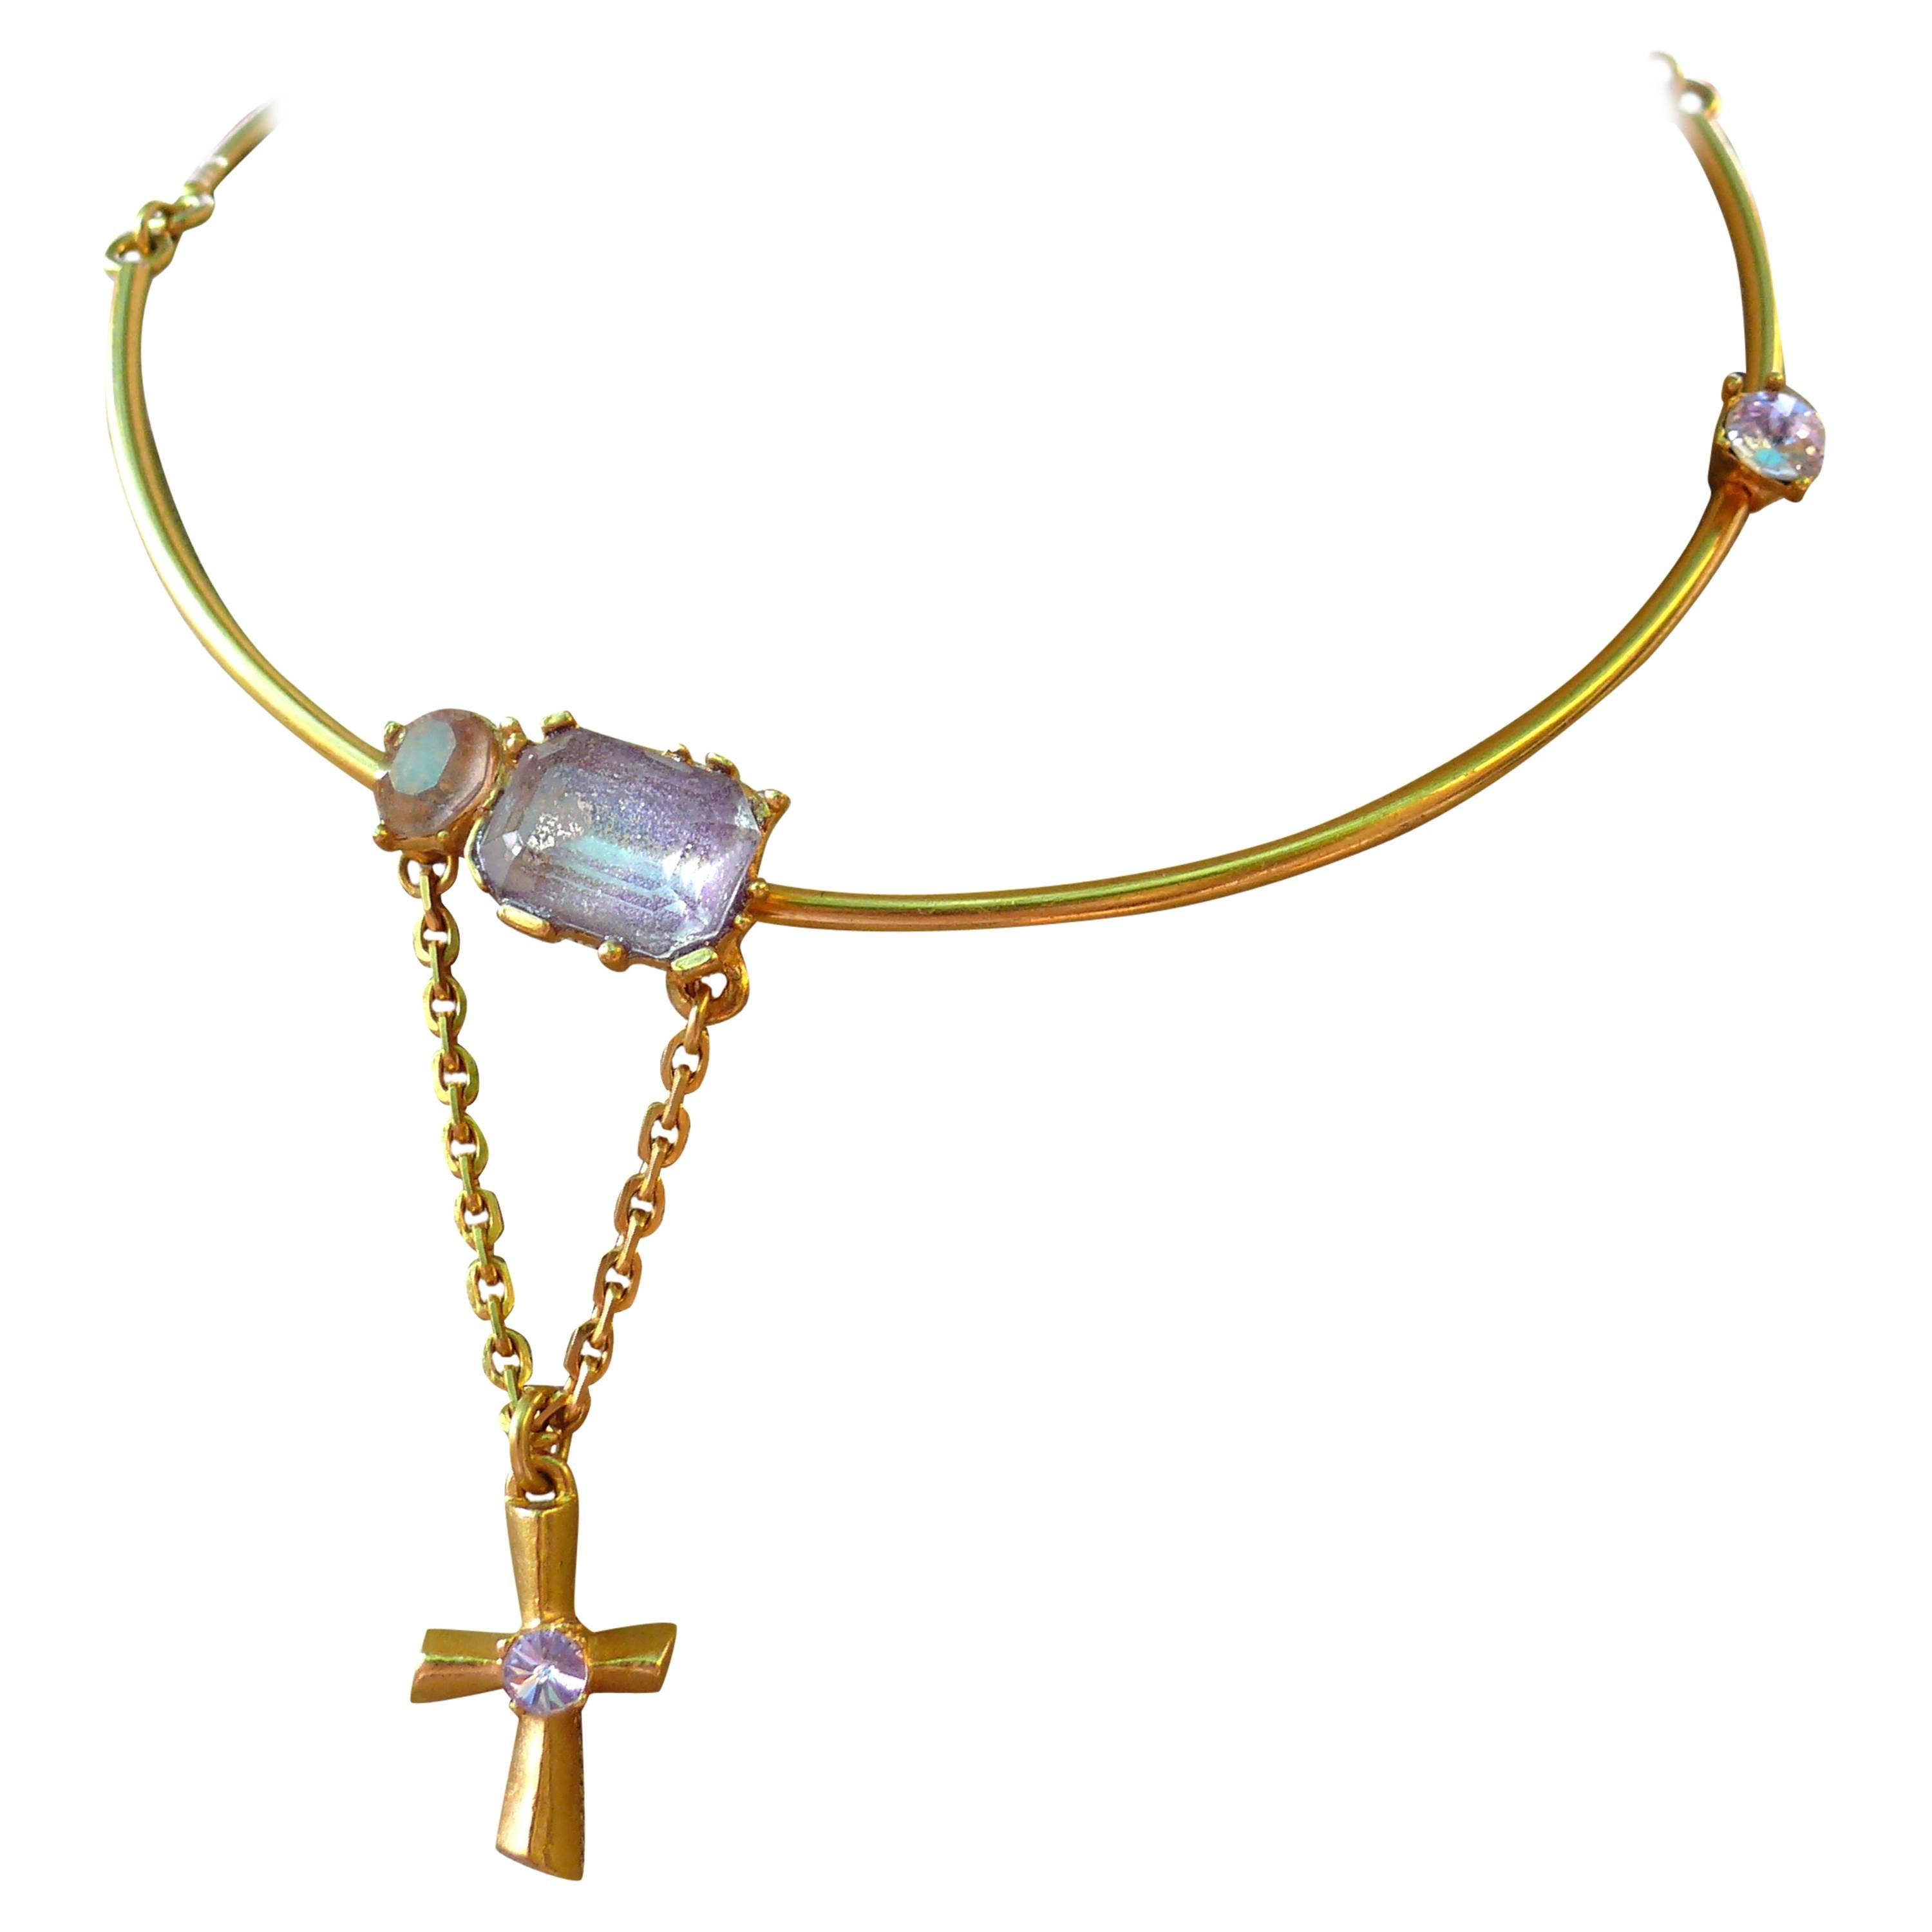 Christian Lacroix Vintage Jewelled Chocker Necklace with Cross Charm